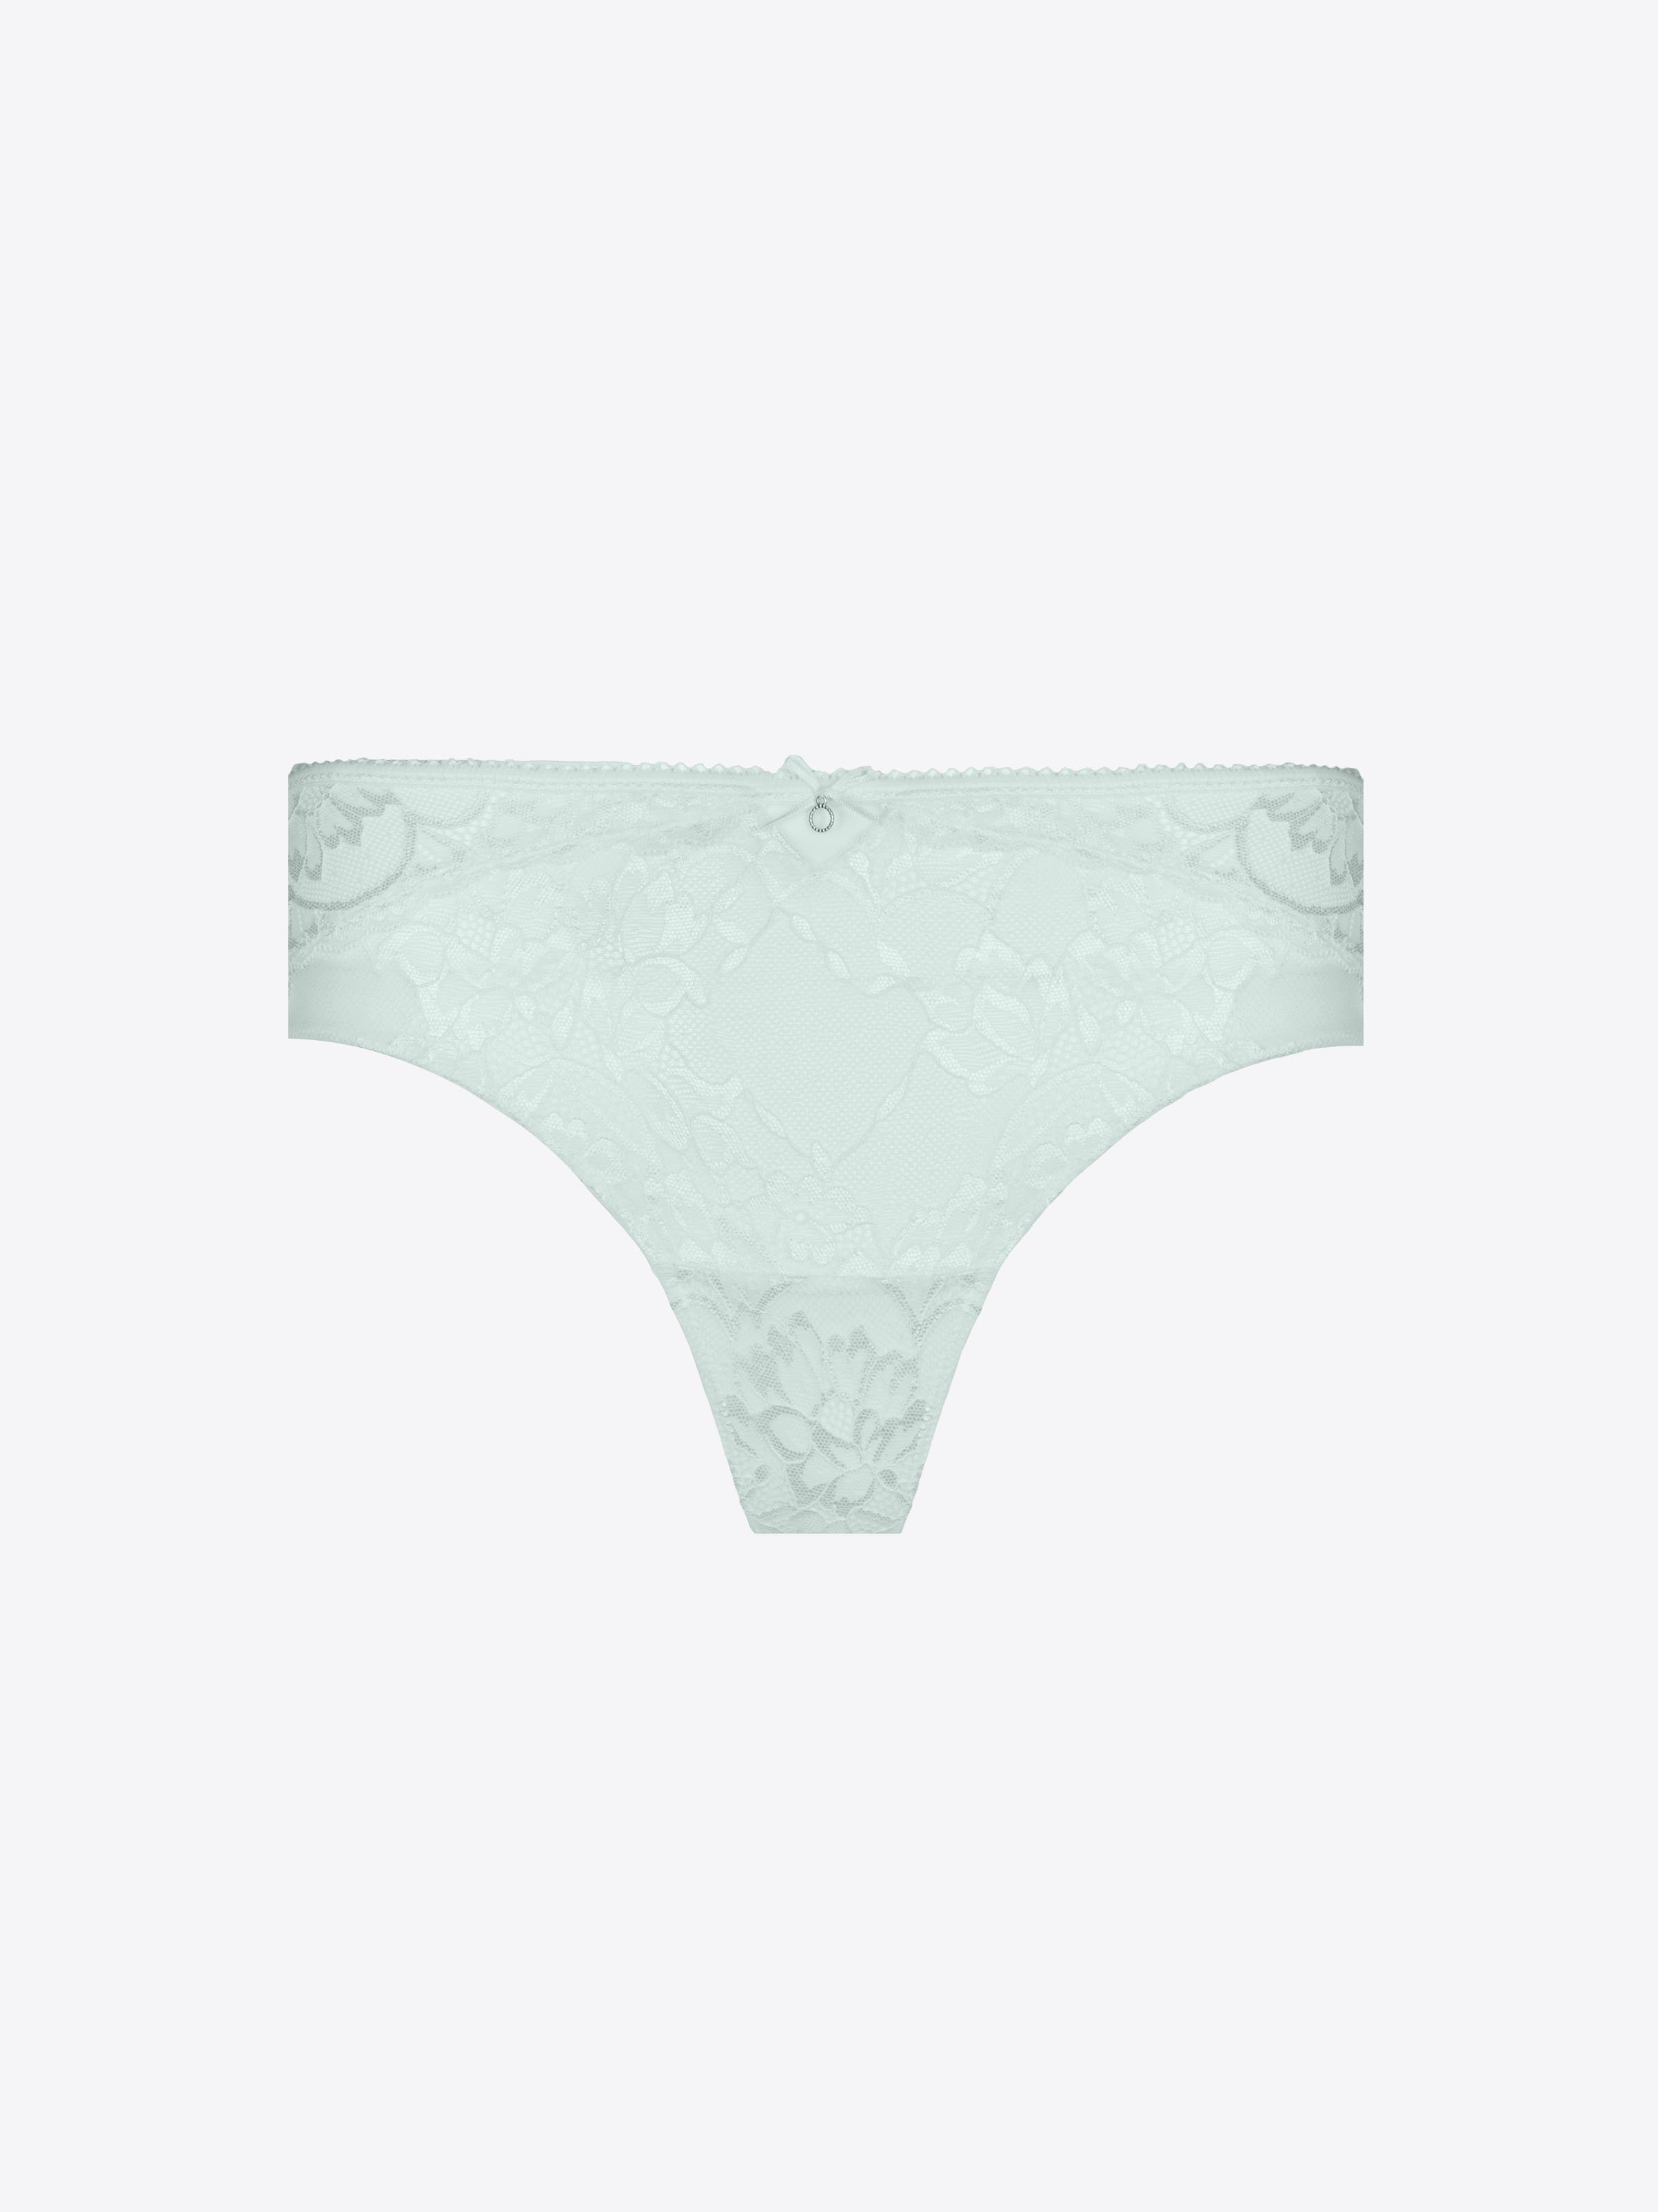 Avery Hipster Thong - Subtle Green - CA$14.75 - CHANGE Lingerie